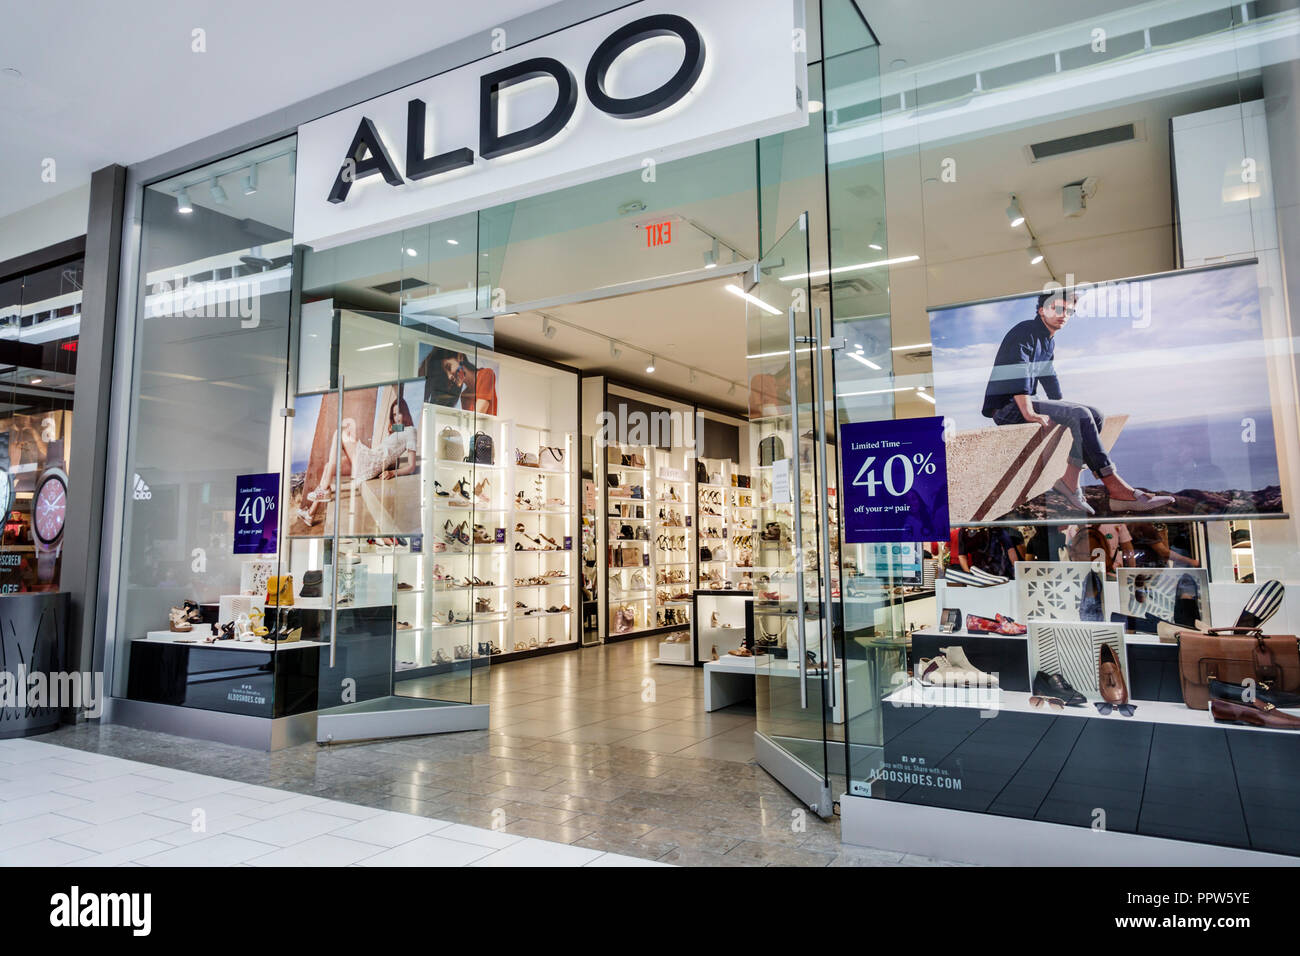 Aldo Shoes High Resolution Stock Photography and Images - Alamy